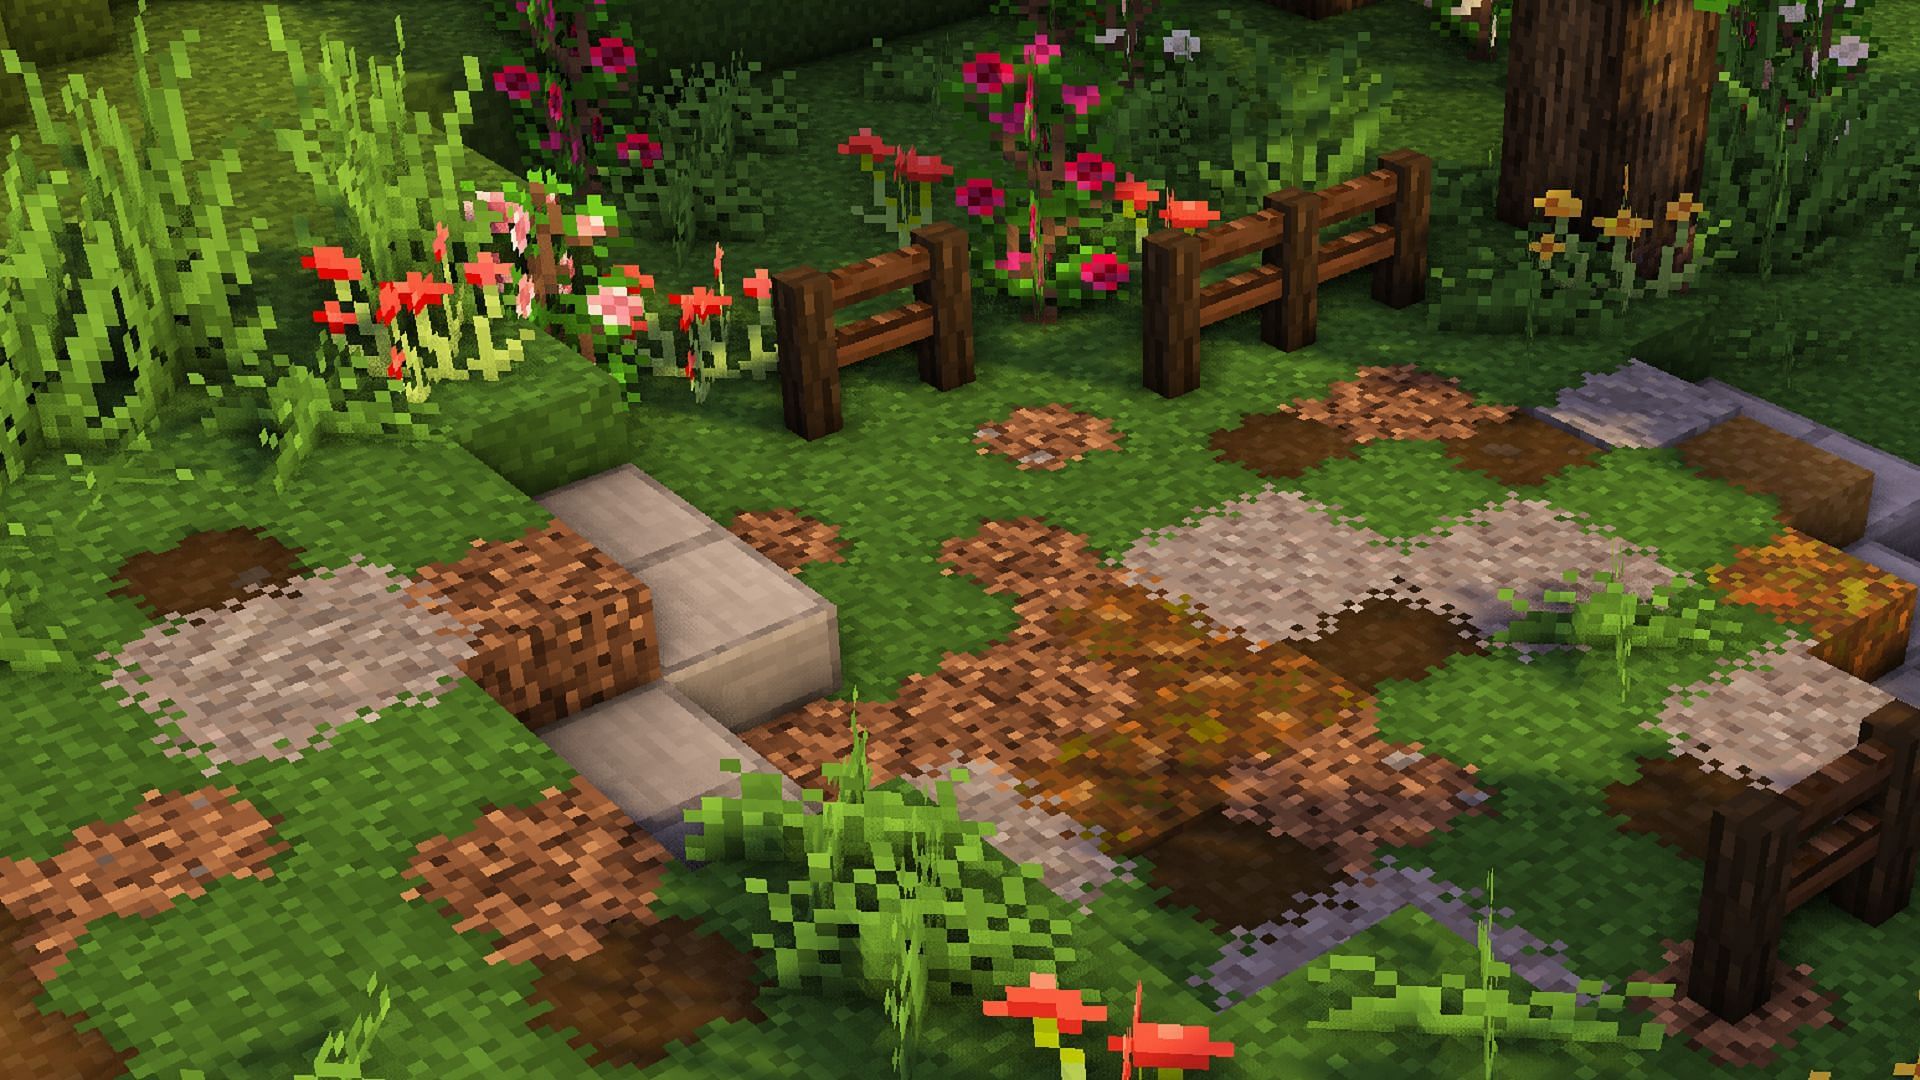 Interconnected Minecraft textures on a forest path using Stay True (Image via haimcyfly/CurseForge)